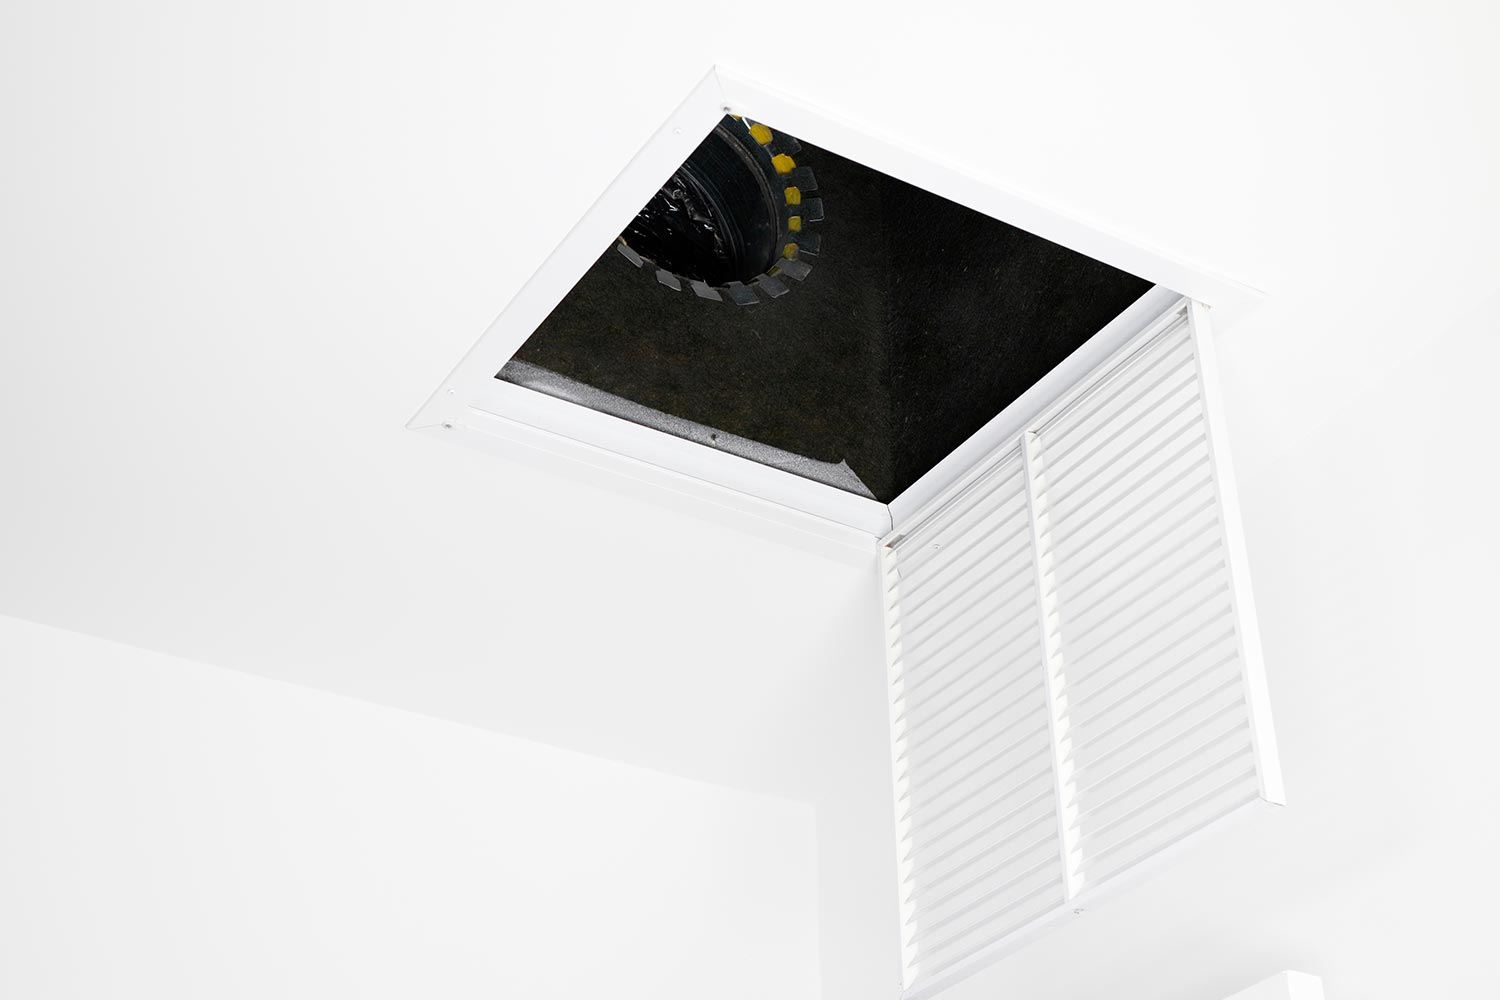 White square ceiling furnace air vent grate open